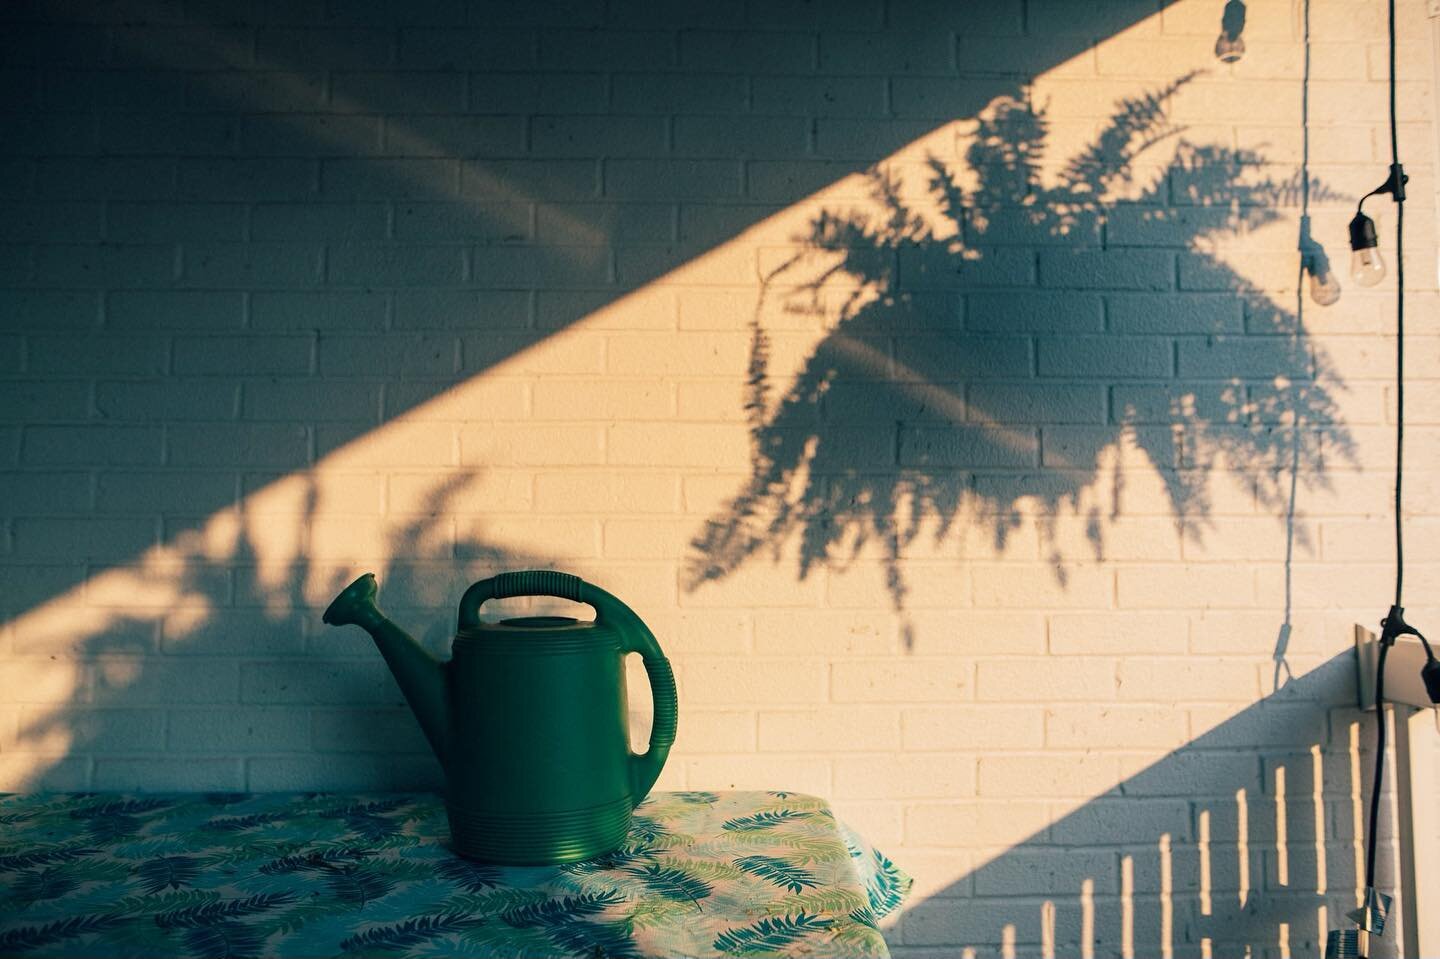 When it comes to summer light at my house, the porch in the morning is where it&rsquo;s at. 🌱 #clickcommunityhunt21 #frontporch .
.
.
.
#clickpromaster #clickpro #clickcommunity  #womencapturemagic #creativephotographynetwork #nikonnofilter #illumin